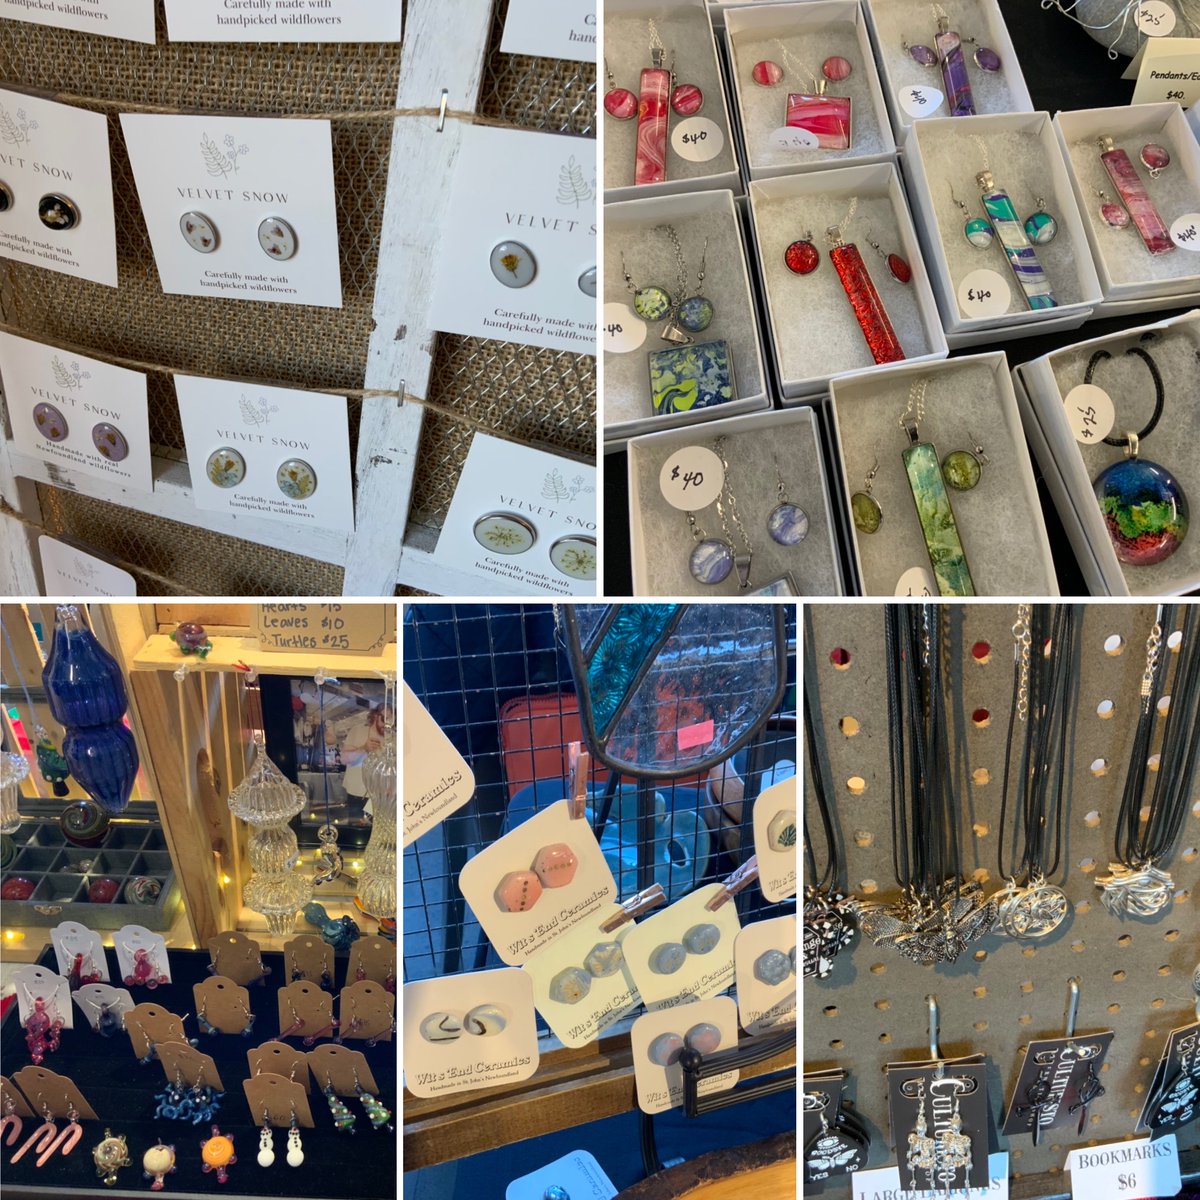 Like all our markets we have some unique jewellery here today until 3pm. #sjfmnl #sjfm #jewllerydesigners #madehere #supportlocalbusinesses #stjohns #holidaygiftideas